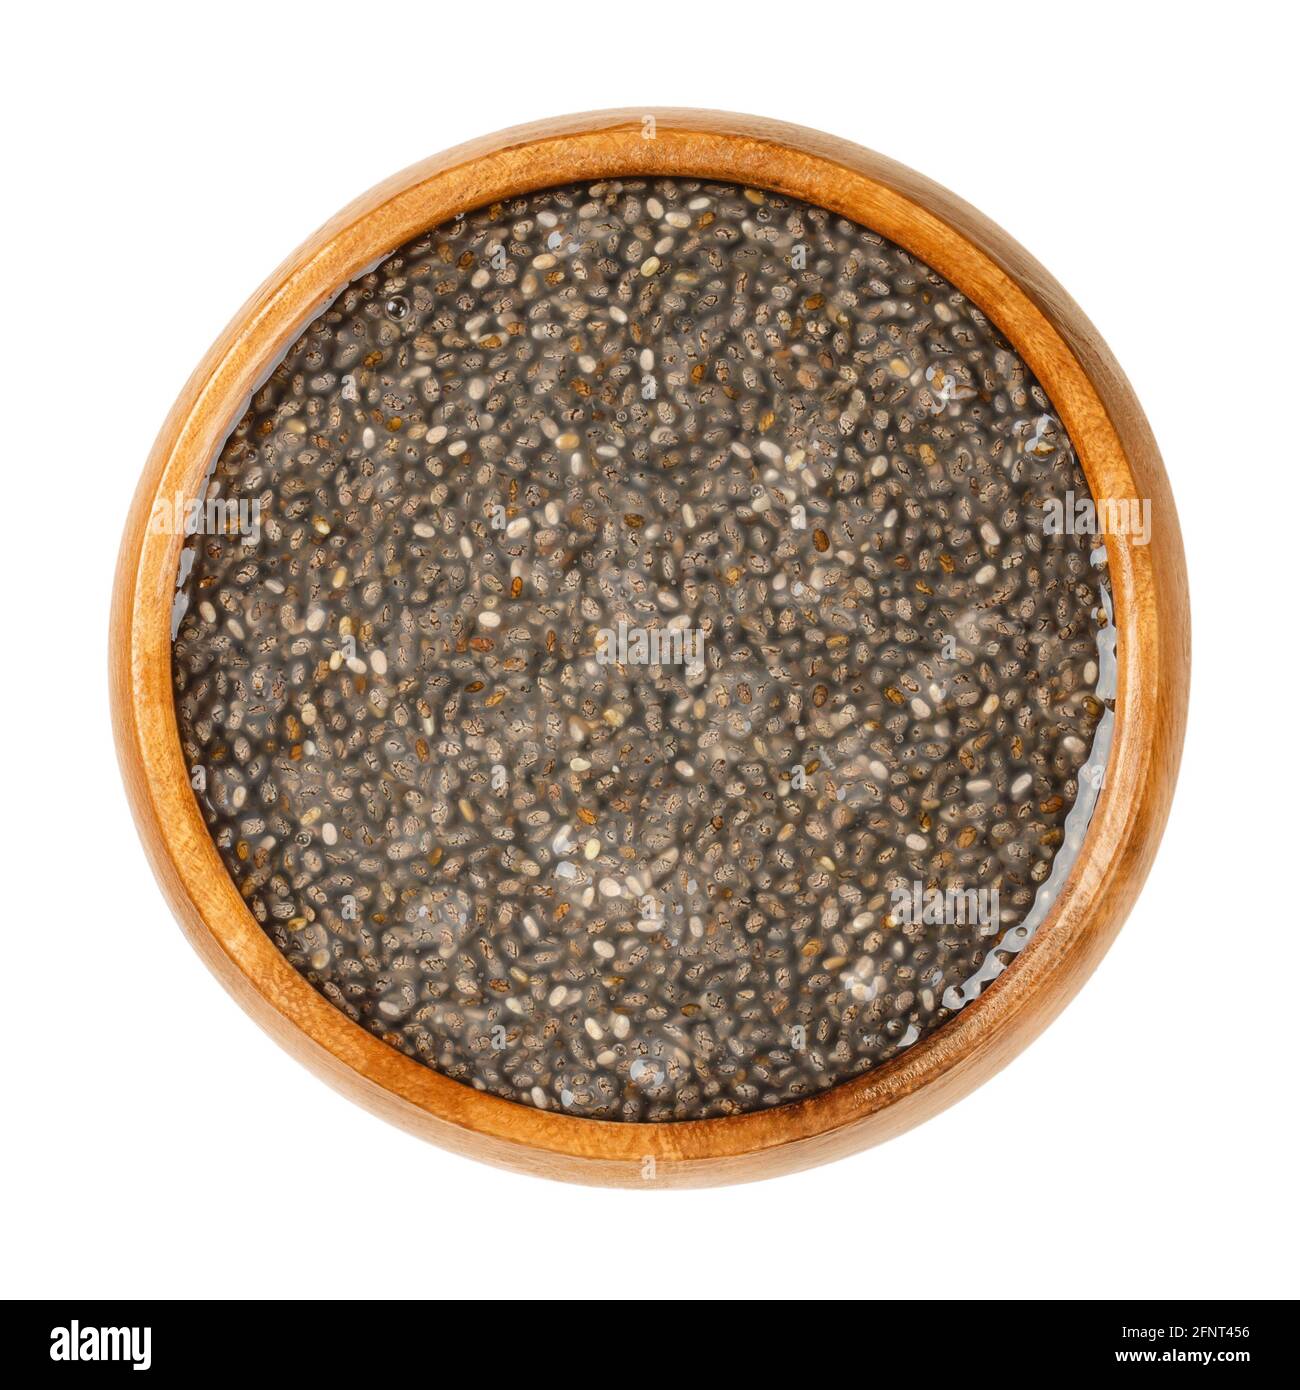 Raw chia seeds, soaked in water, in a wooden bowl. Fruits of Salvia hispanica, very hygroscopic, absorbing twelve times their weight. Stock Photo